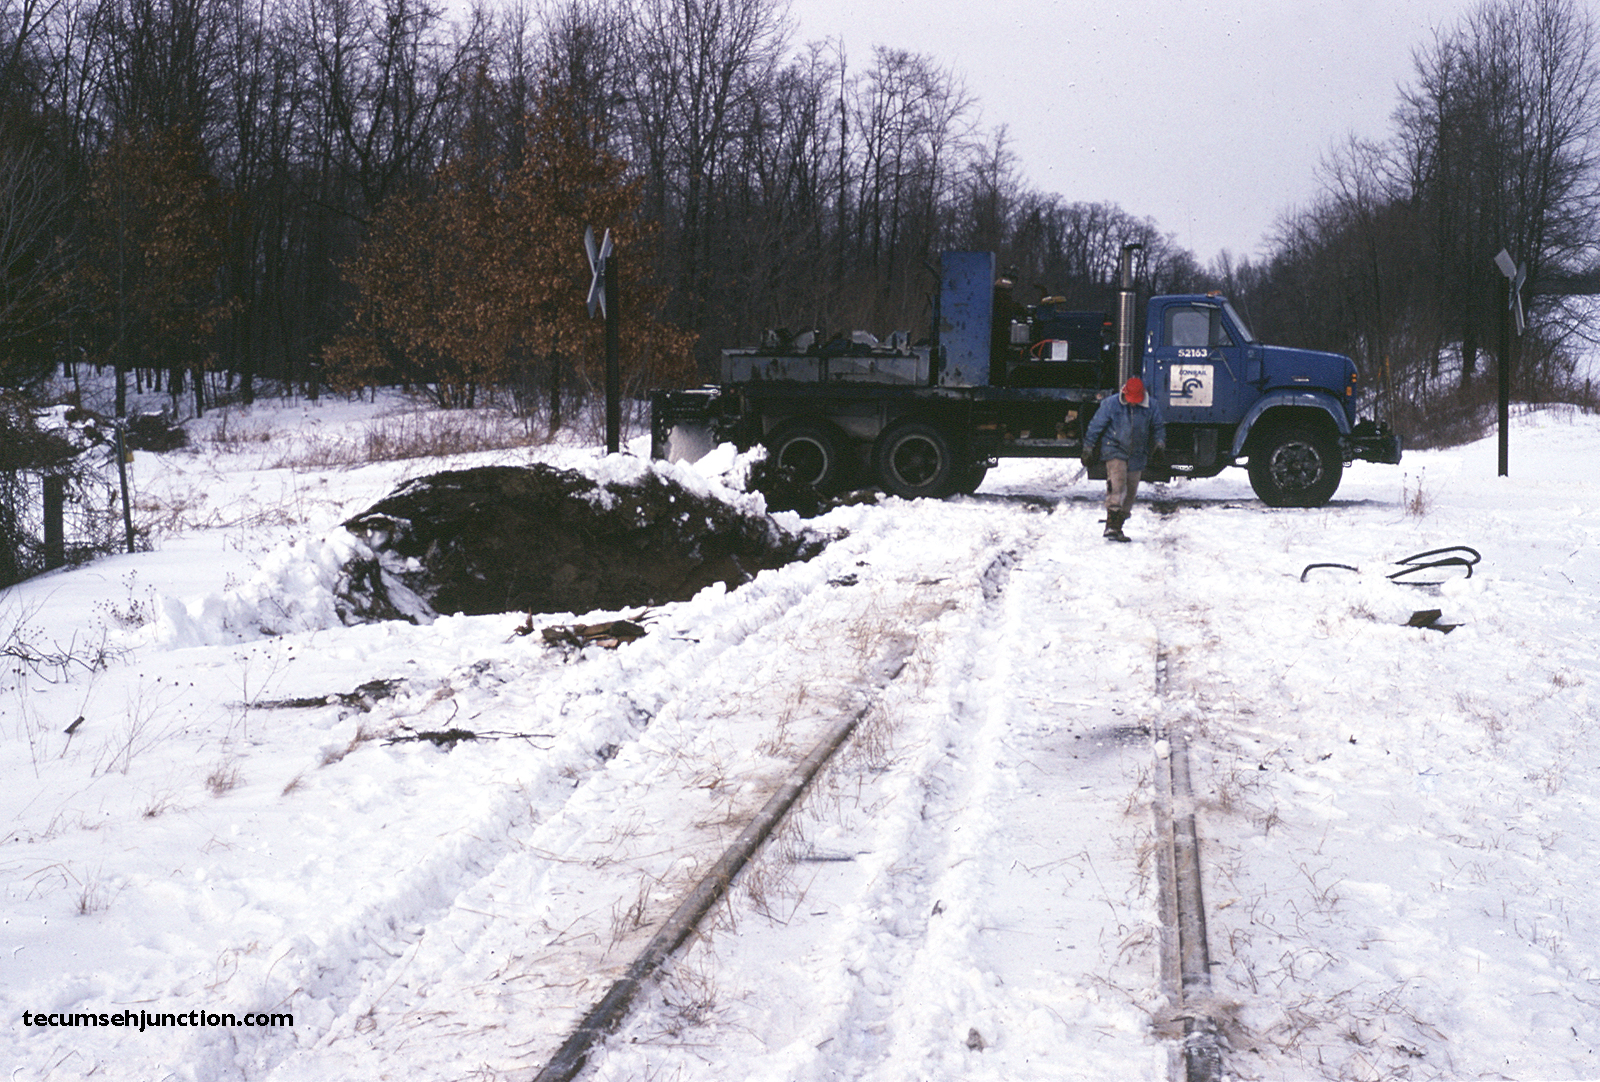 The point of the derailment, just south of the Chase Road crossing.